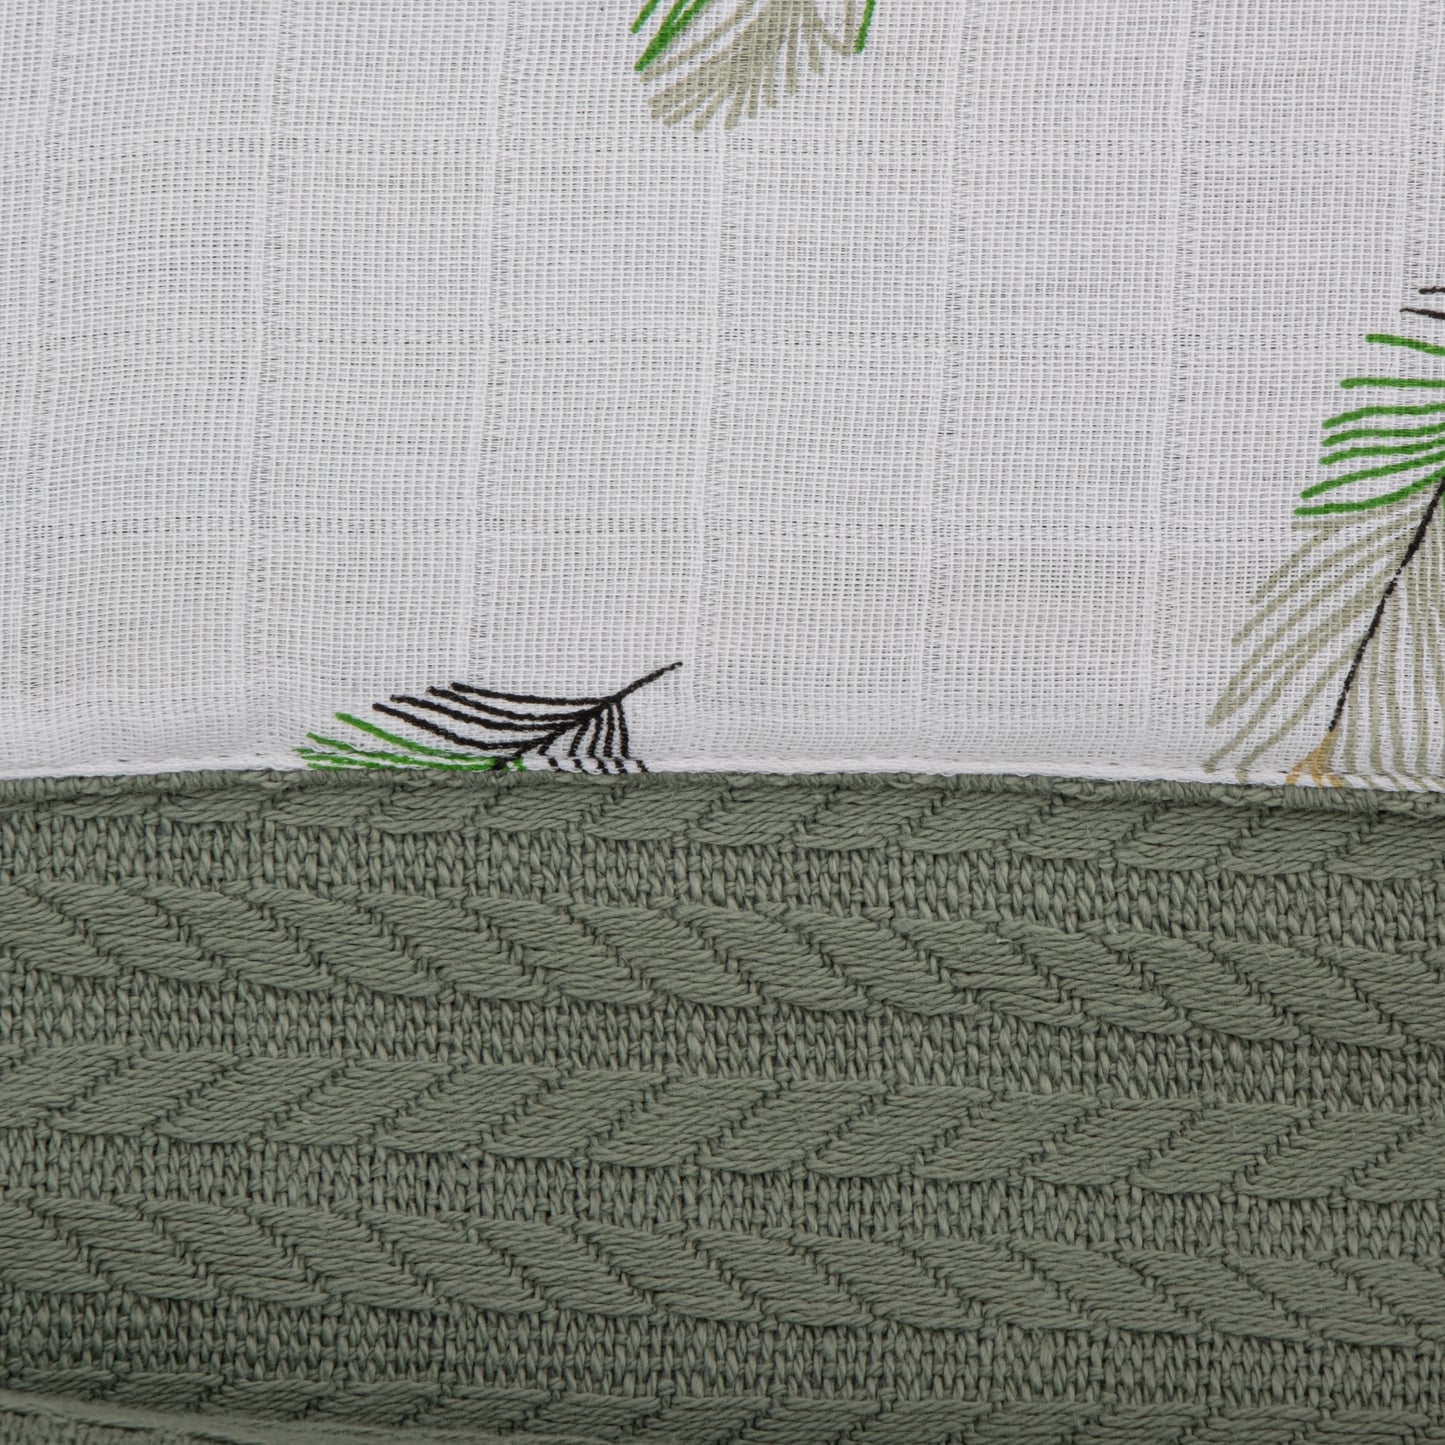 Pique Blanket - Double Side - Green Braid - Green Feather